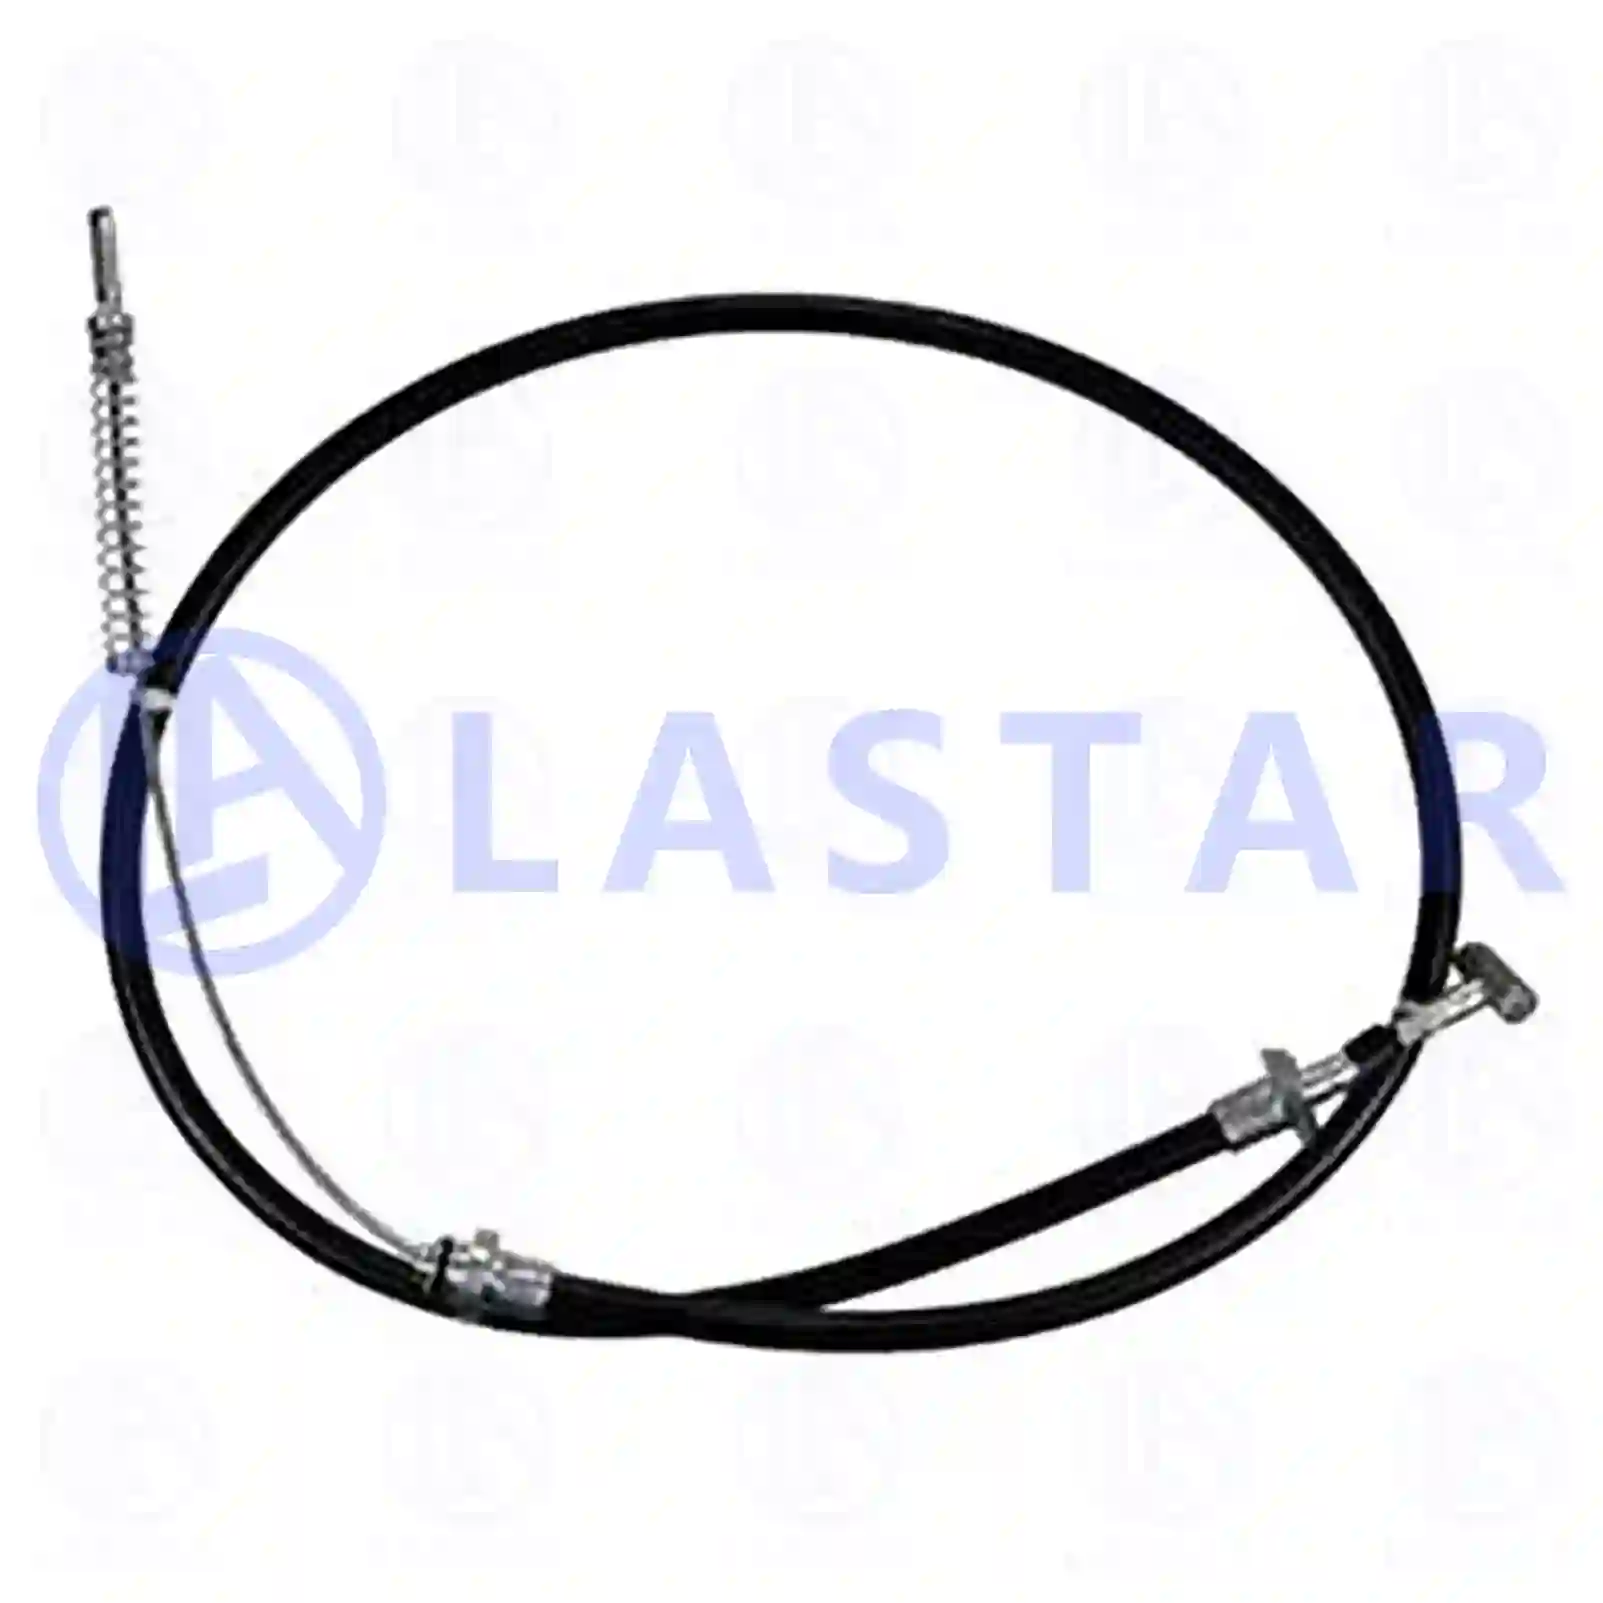 Bowden cable, parking brake, 77717038, 2997361, 50408206 ||  77717038 Lastar Spare Part | Truck Spare Parts, Auotomotive Spare Parts Bowden cable, parking brake, 77717038, 2997361, 50408206 ||  77717038 Lastar Spare Part | Truck Spare Parts, Auotomotive Spare Parts